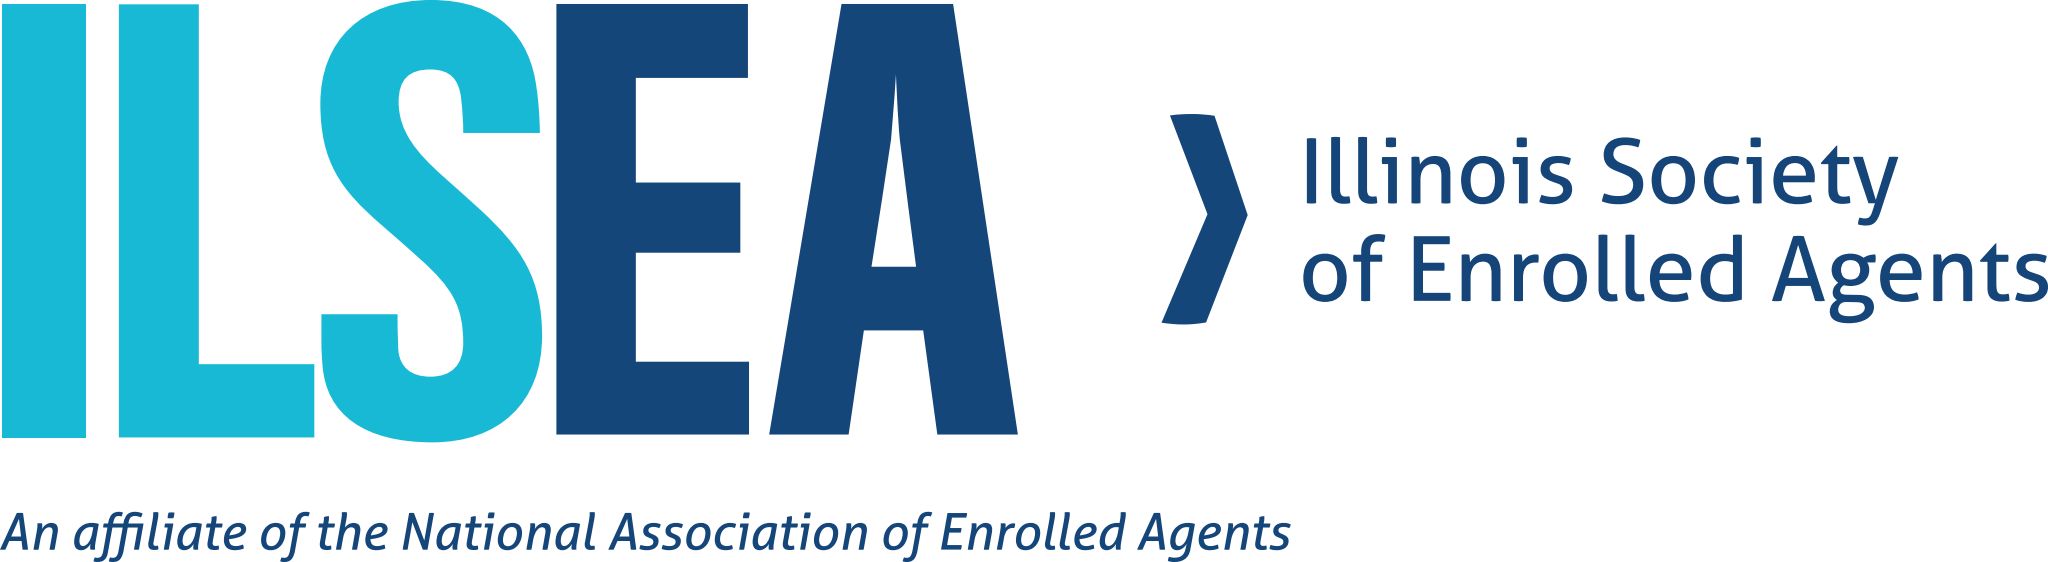 Illinois Society of Enrolled Agents